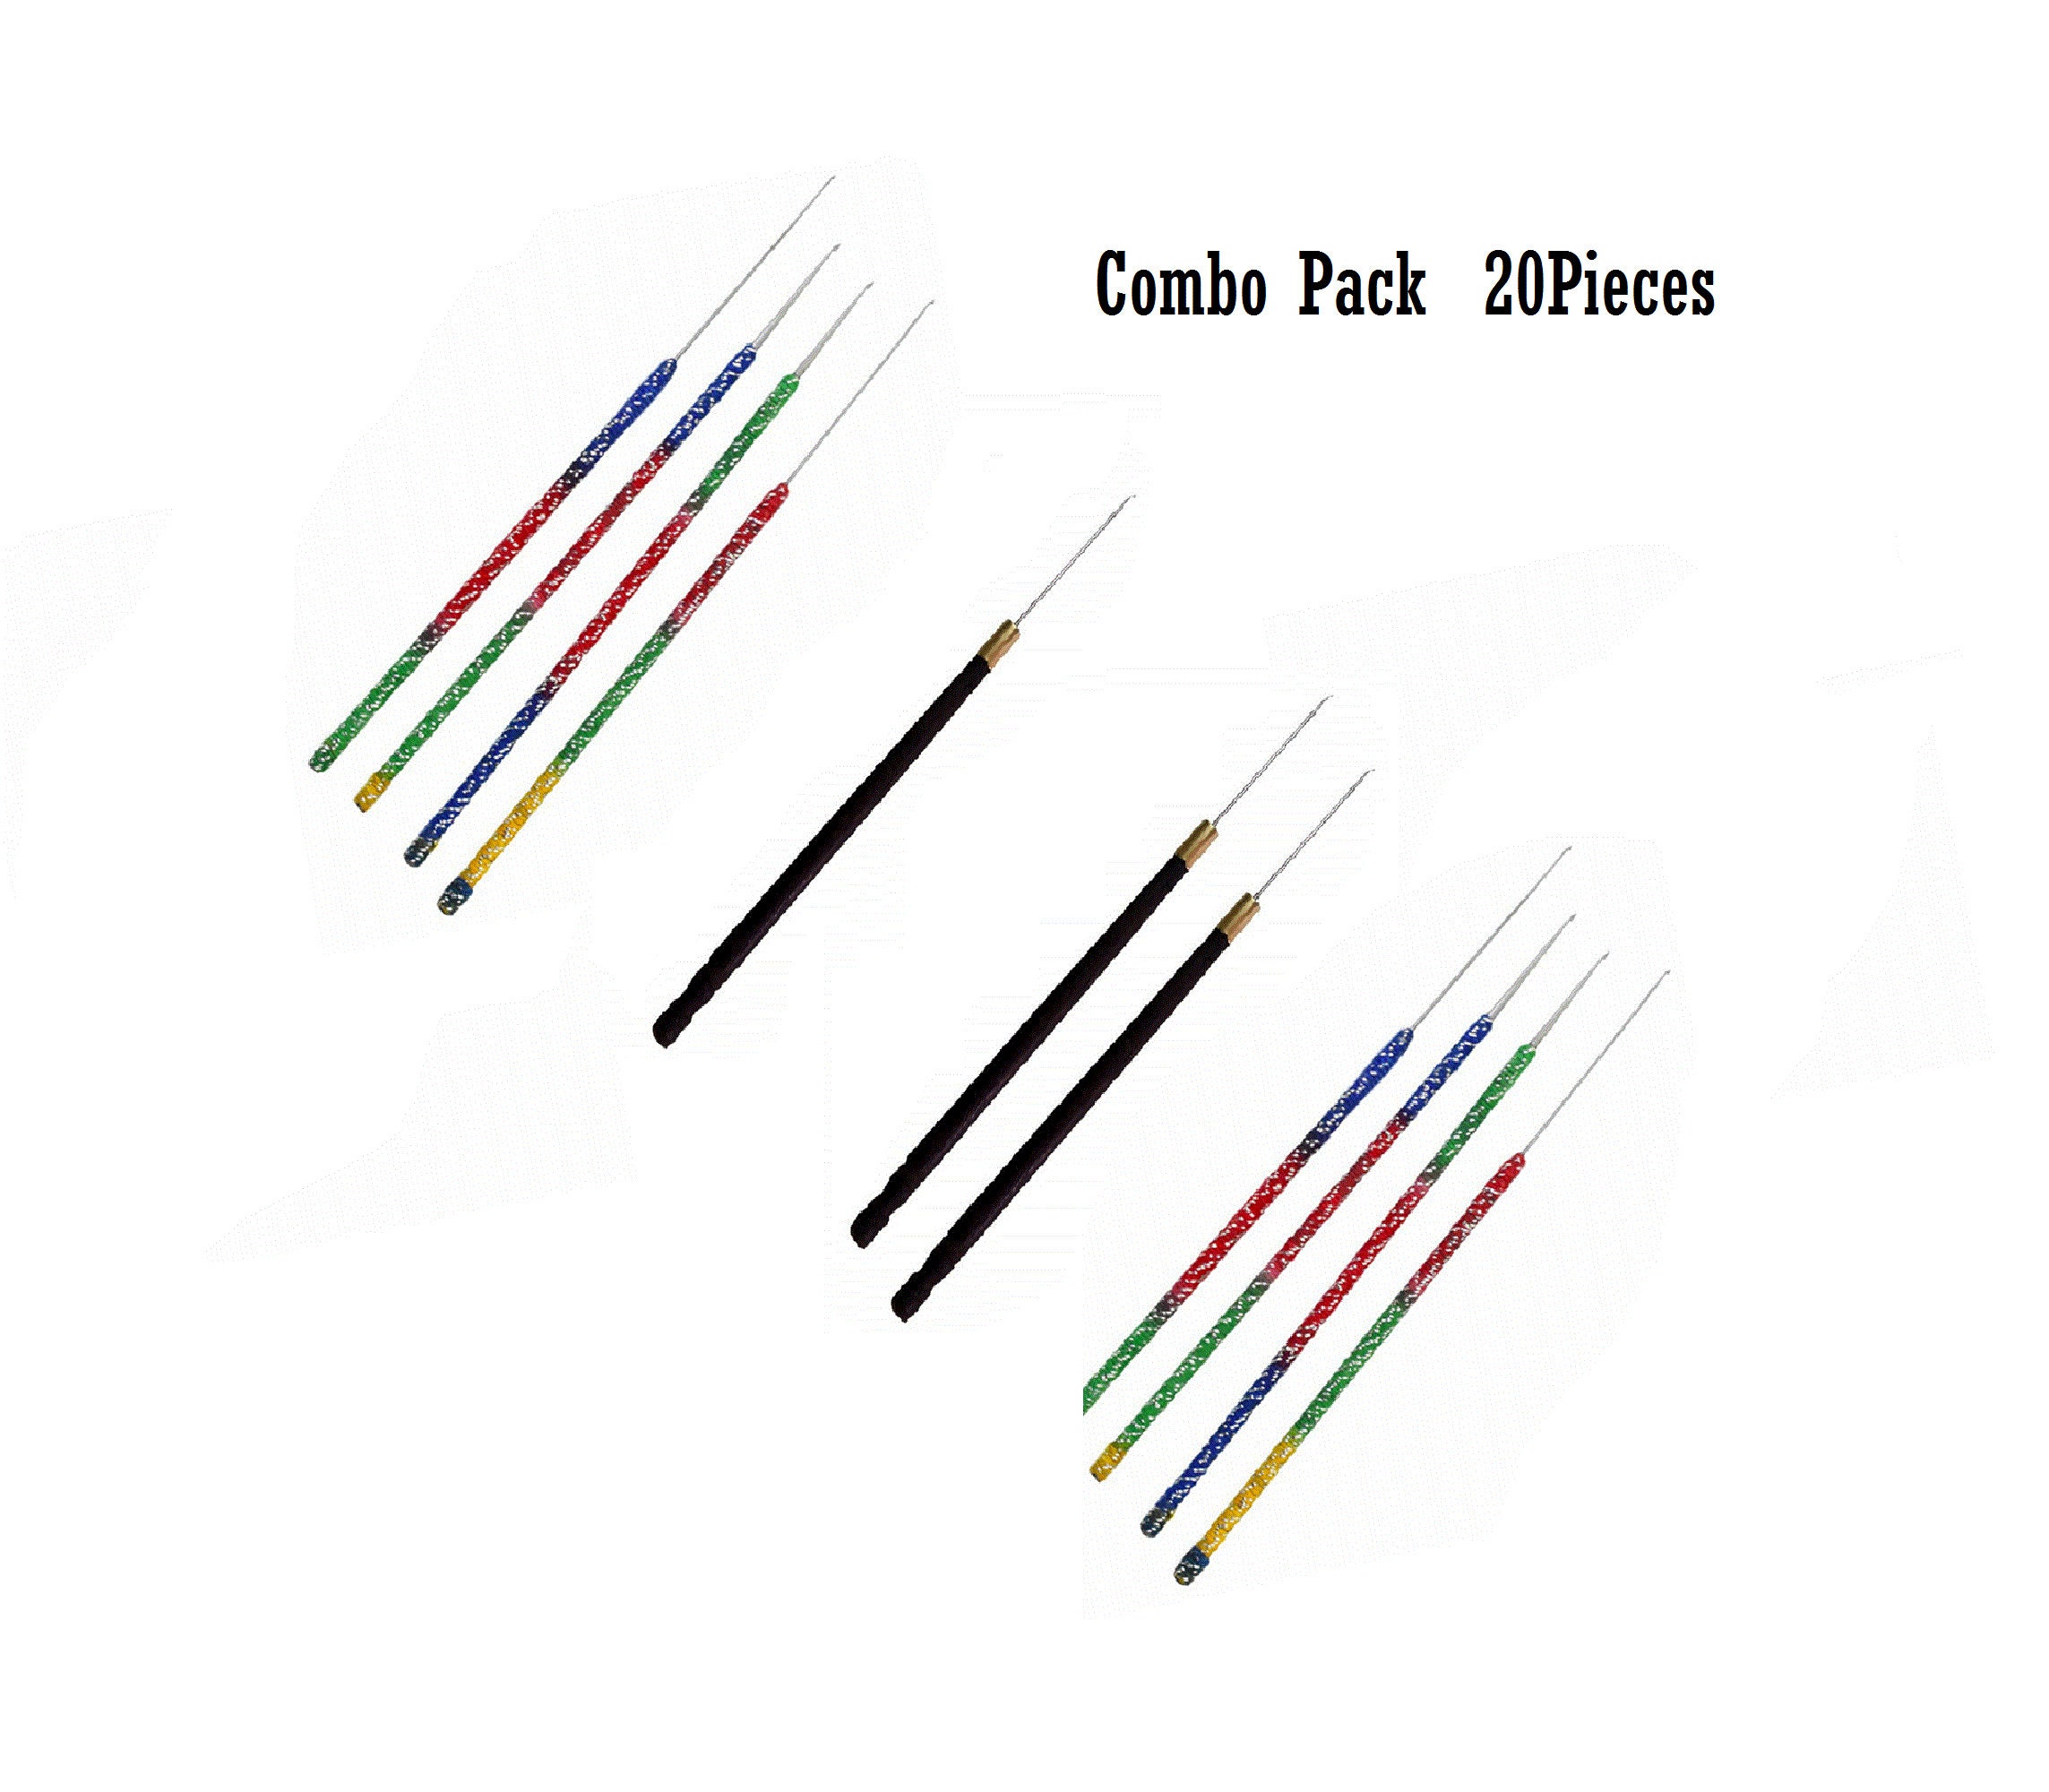 Beading Needles Size 12 Pack of 25, Ideal for Bead Weaving & Seed